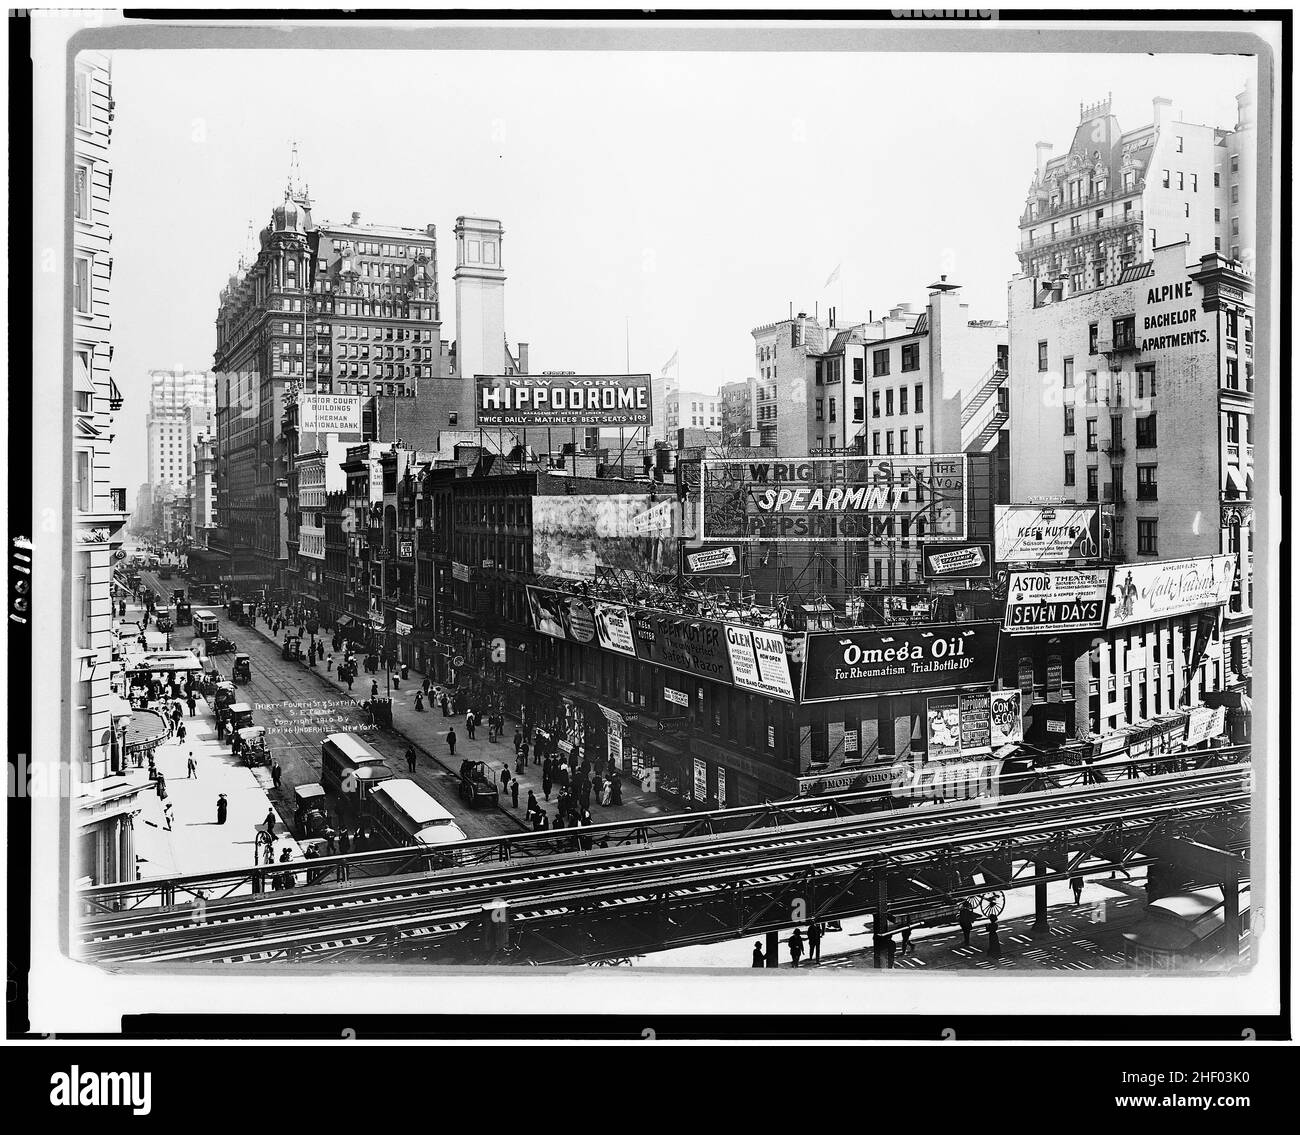 Vintage New York - Thirty-Fourth Street & Sixth Avenue. S.E. corner. Photo by Irving Underhill. c 1910. Old New York photo. Stock Photo